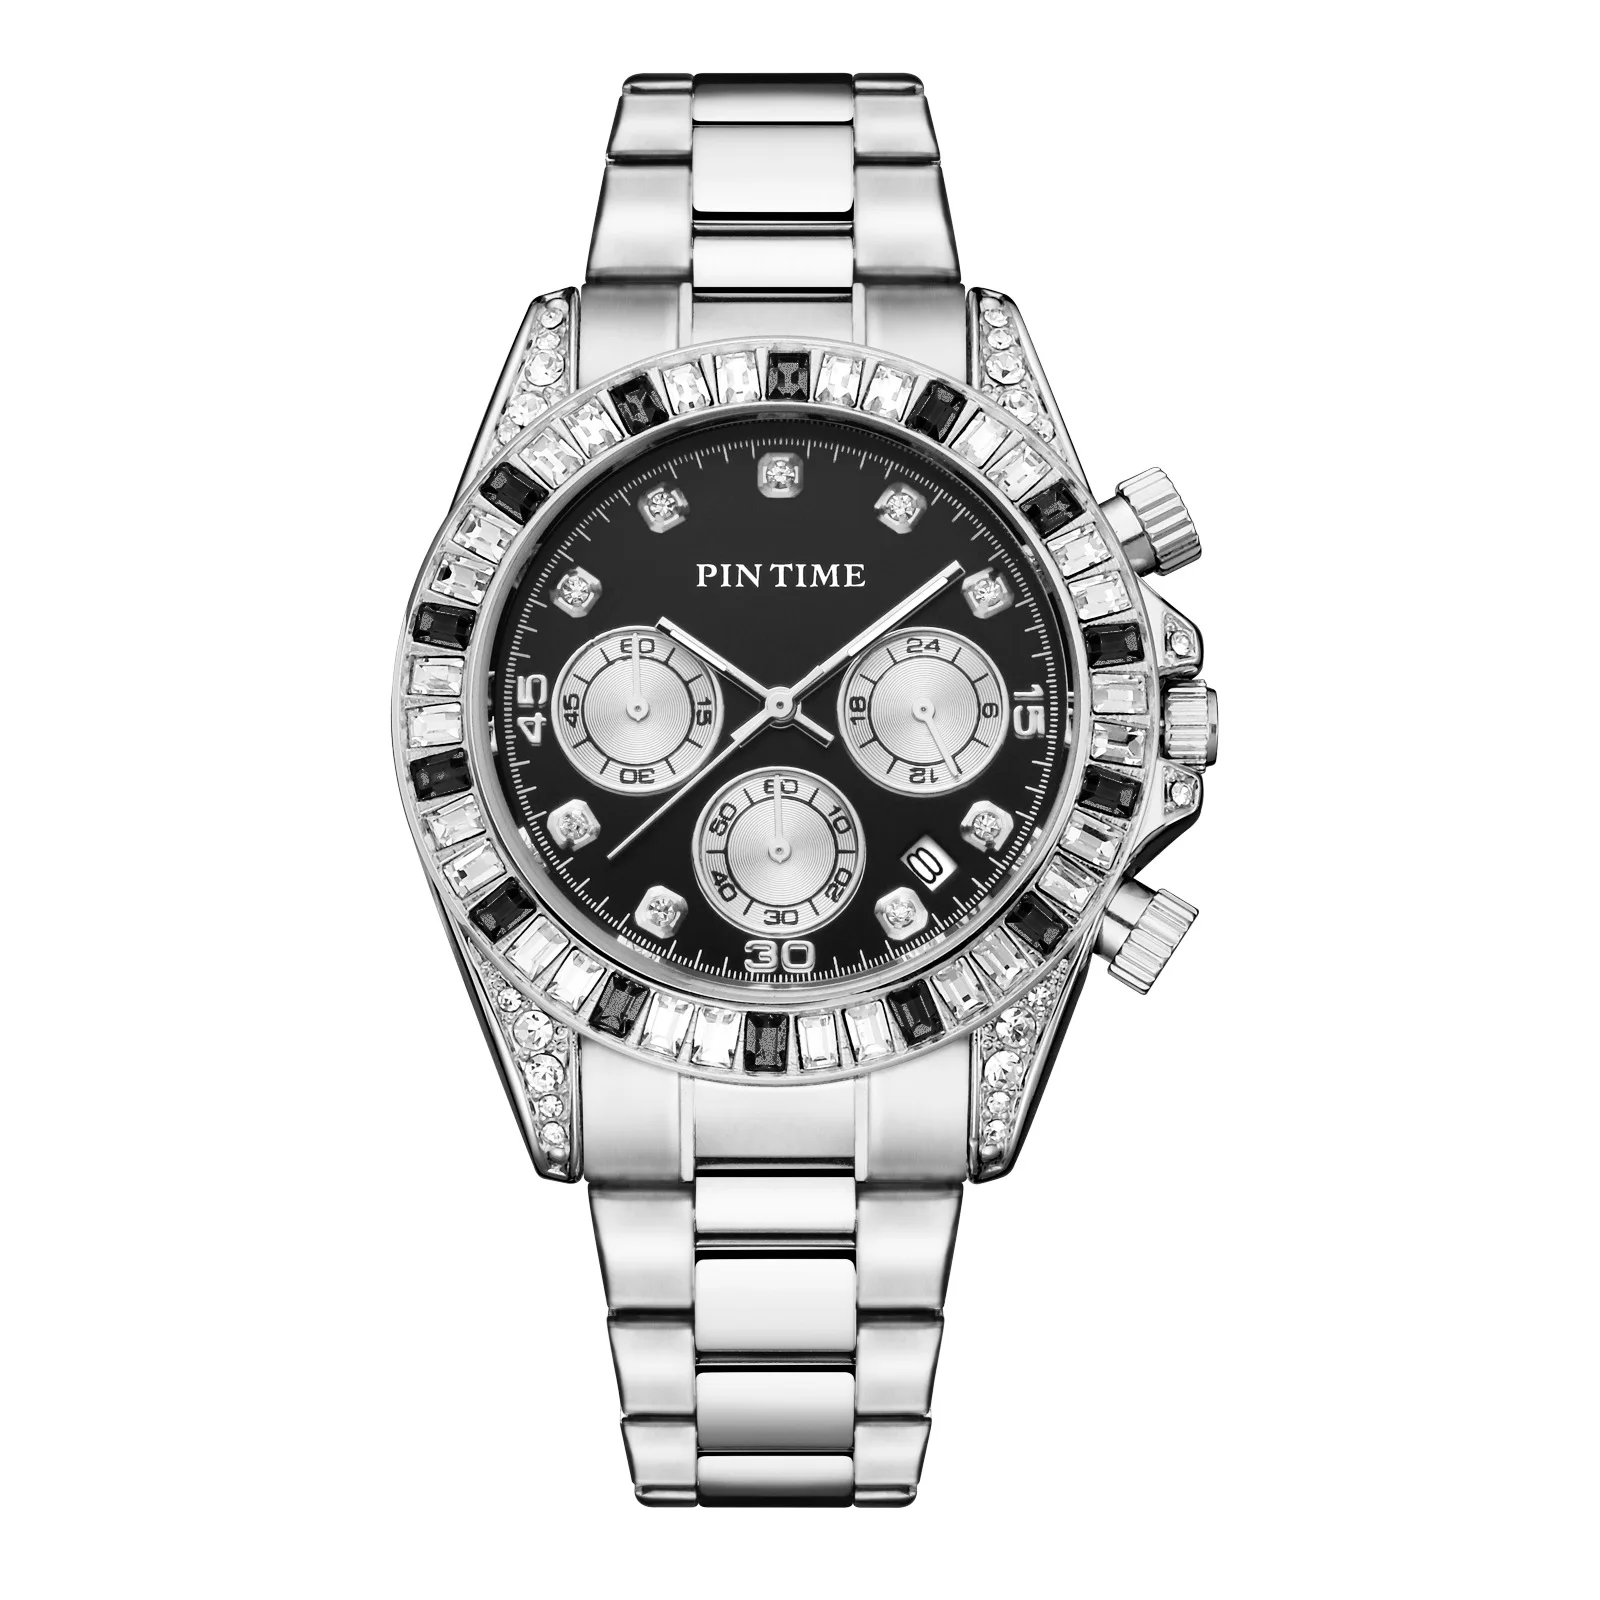 top brand pintime 1560 frosted stainless| Alibaba.com